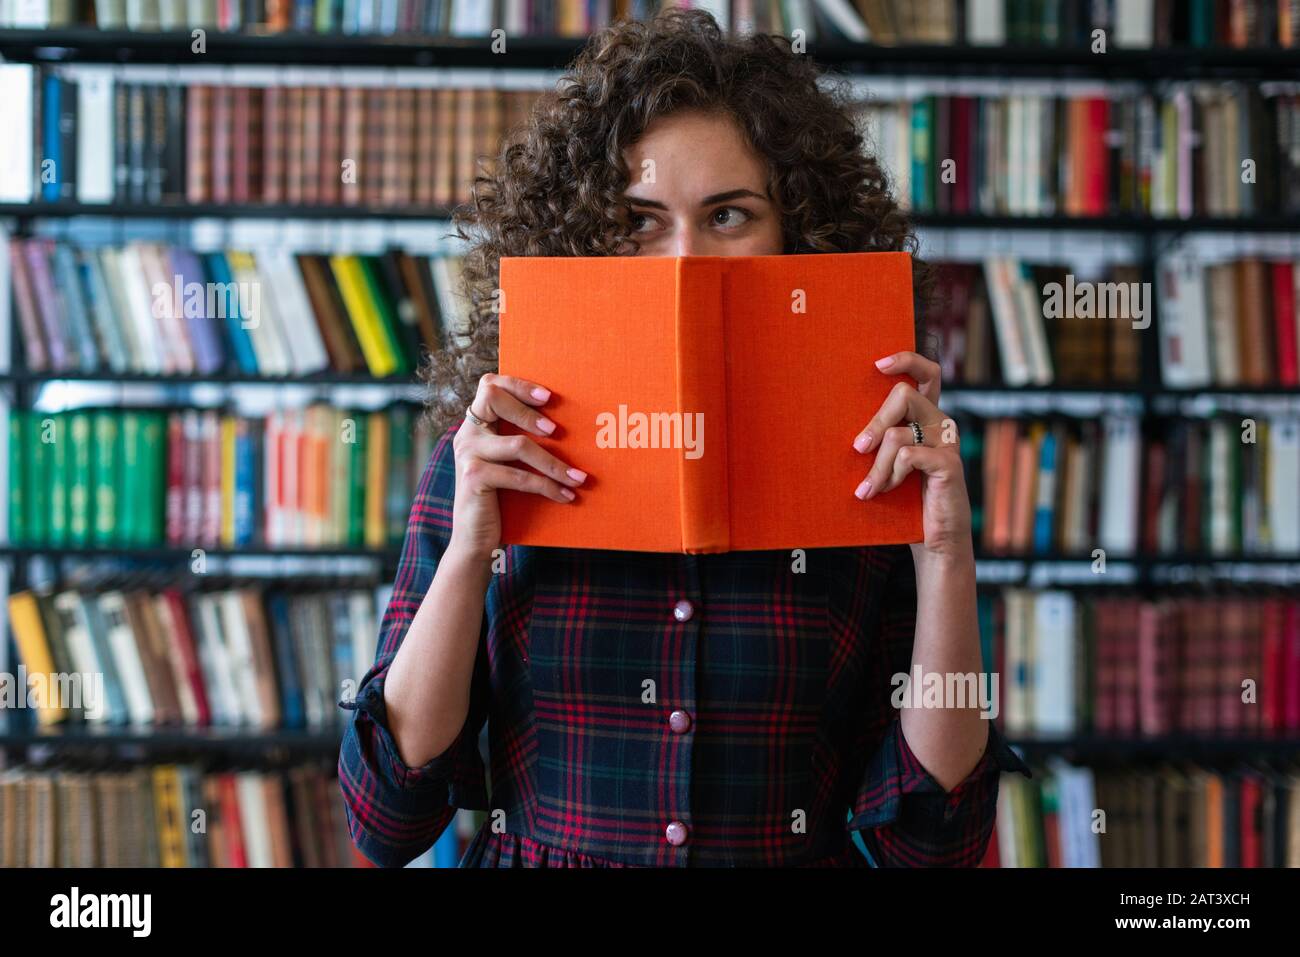 Playful girl holding a book covering her face and looking off to the side. Glance Hardcover Book Stock Photo